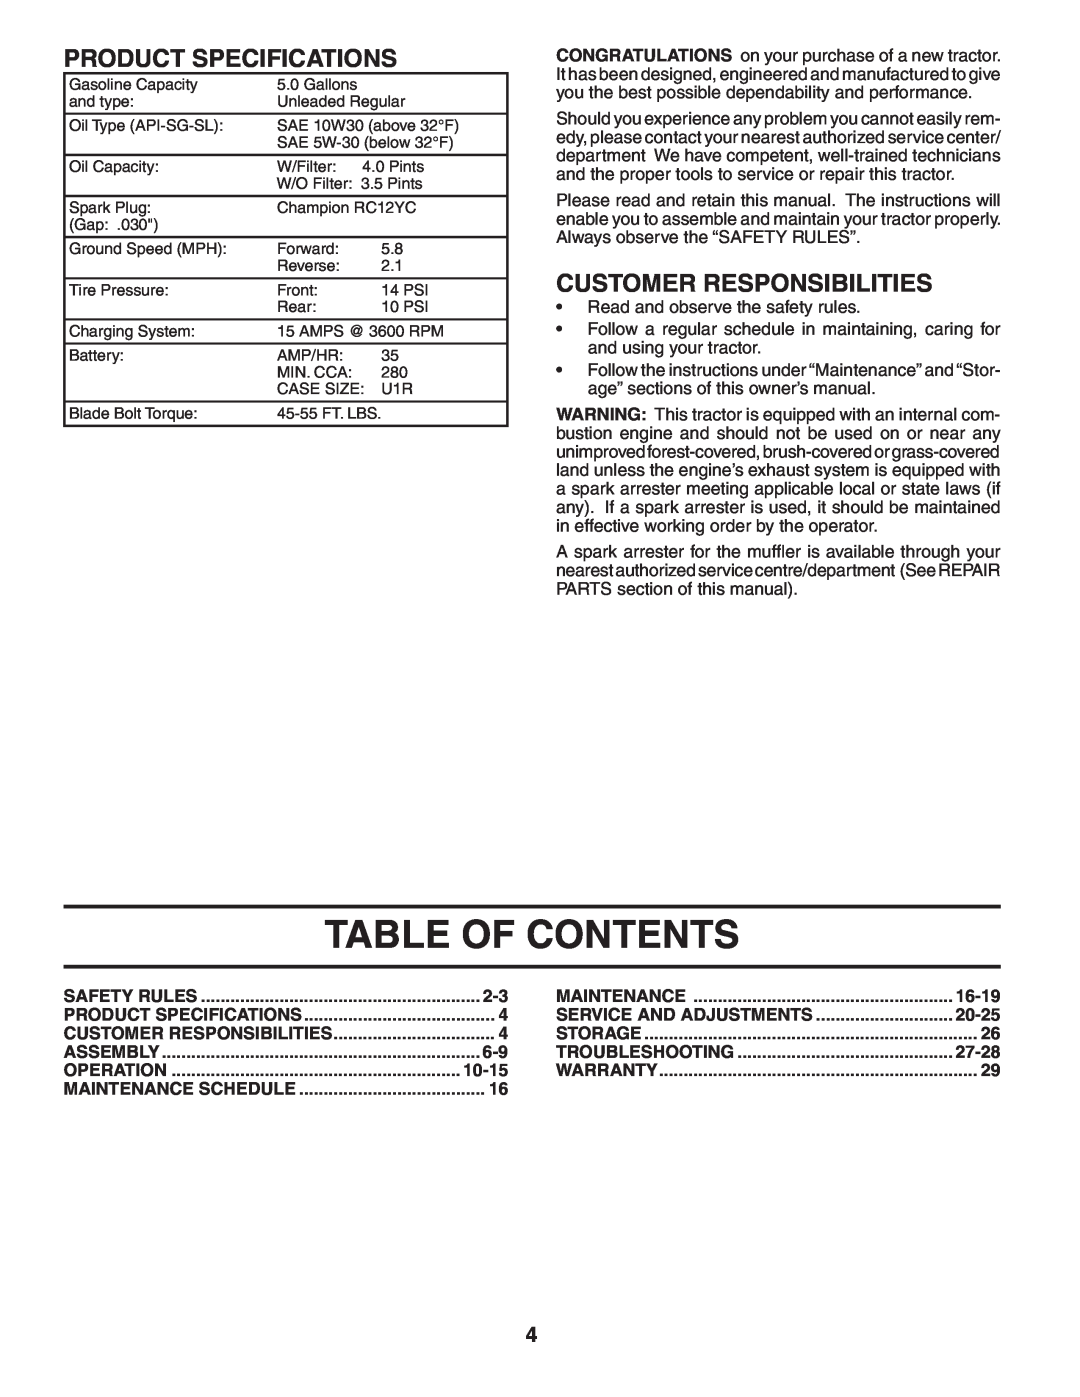 Poulan PKGTH2554 manual Table Of Contents, Product Specifications, Customer Responsibilities 